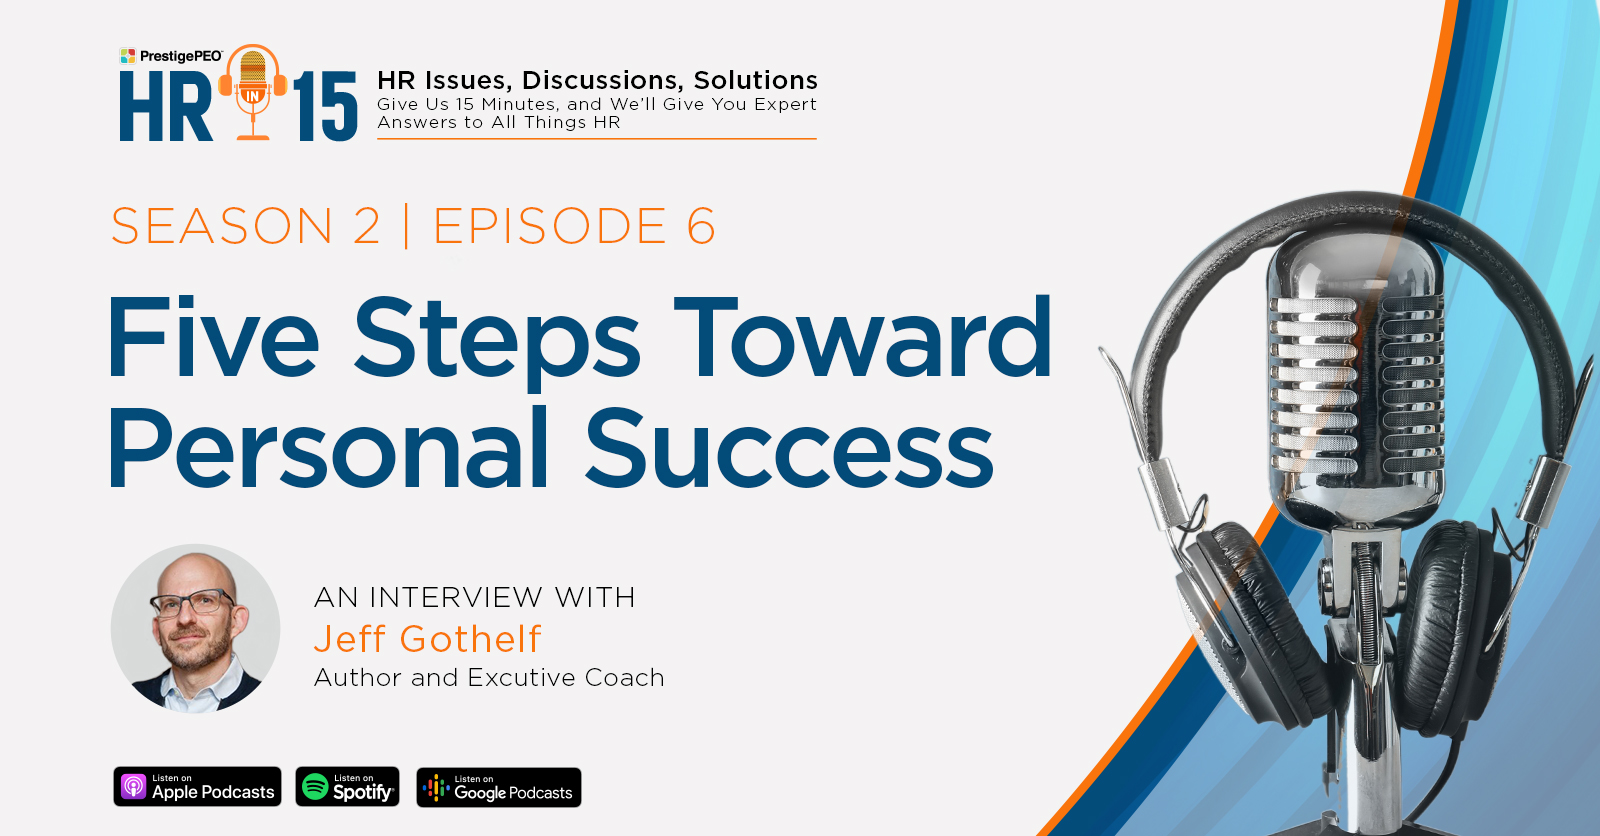 HR-in-15 Interview with Jeff Gothelf: Five steps toward personal success